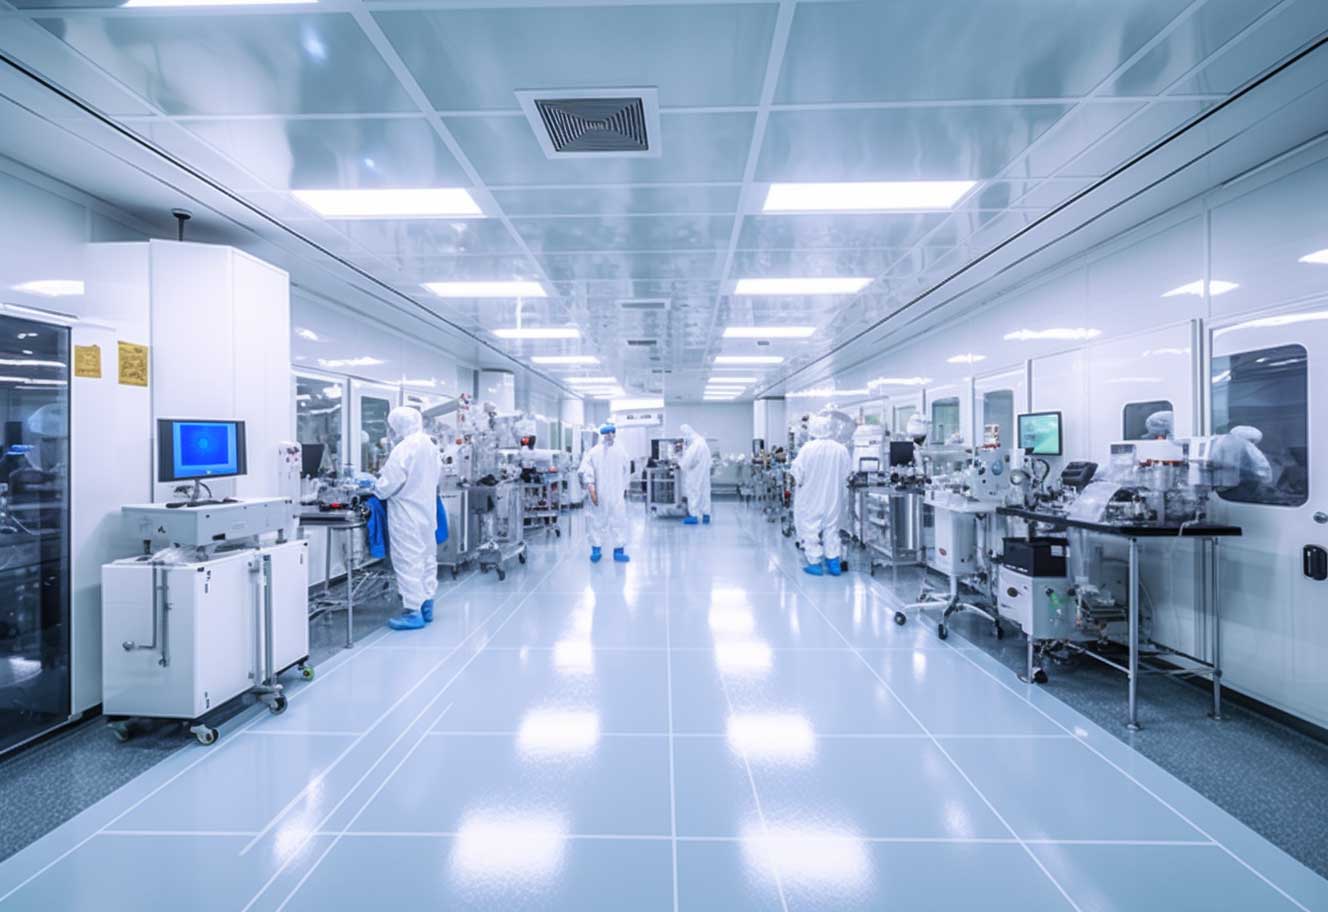 lcd factory's cleanroom laboratory with rows of machines and equipment used for the production of semiconductor materials